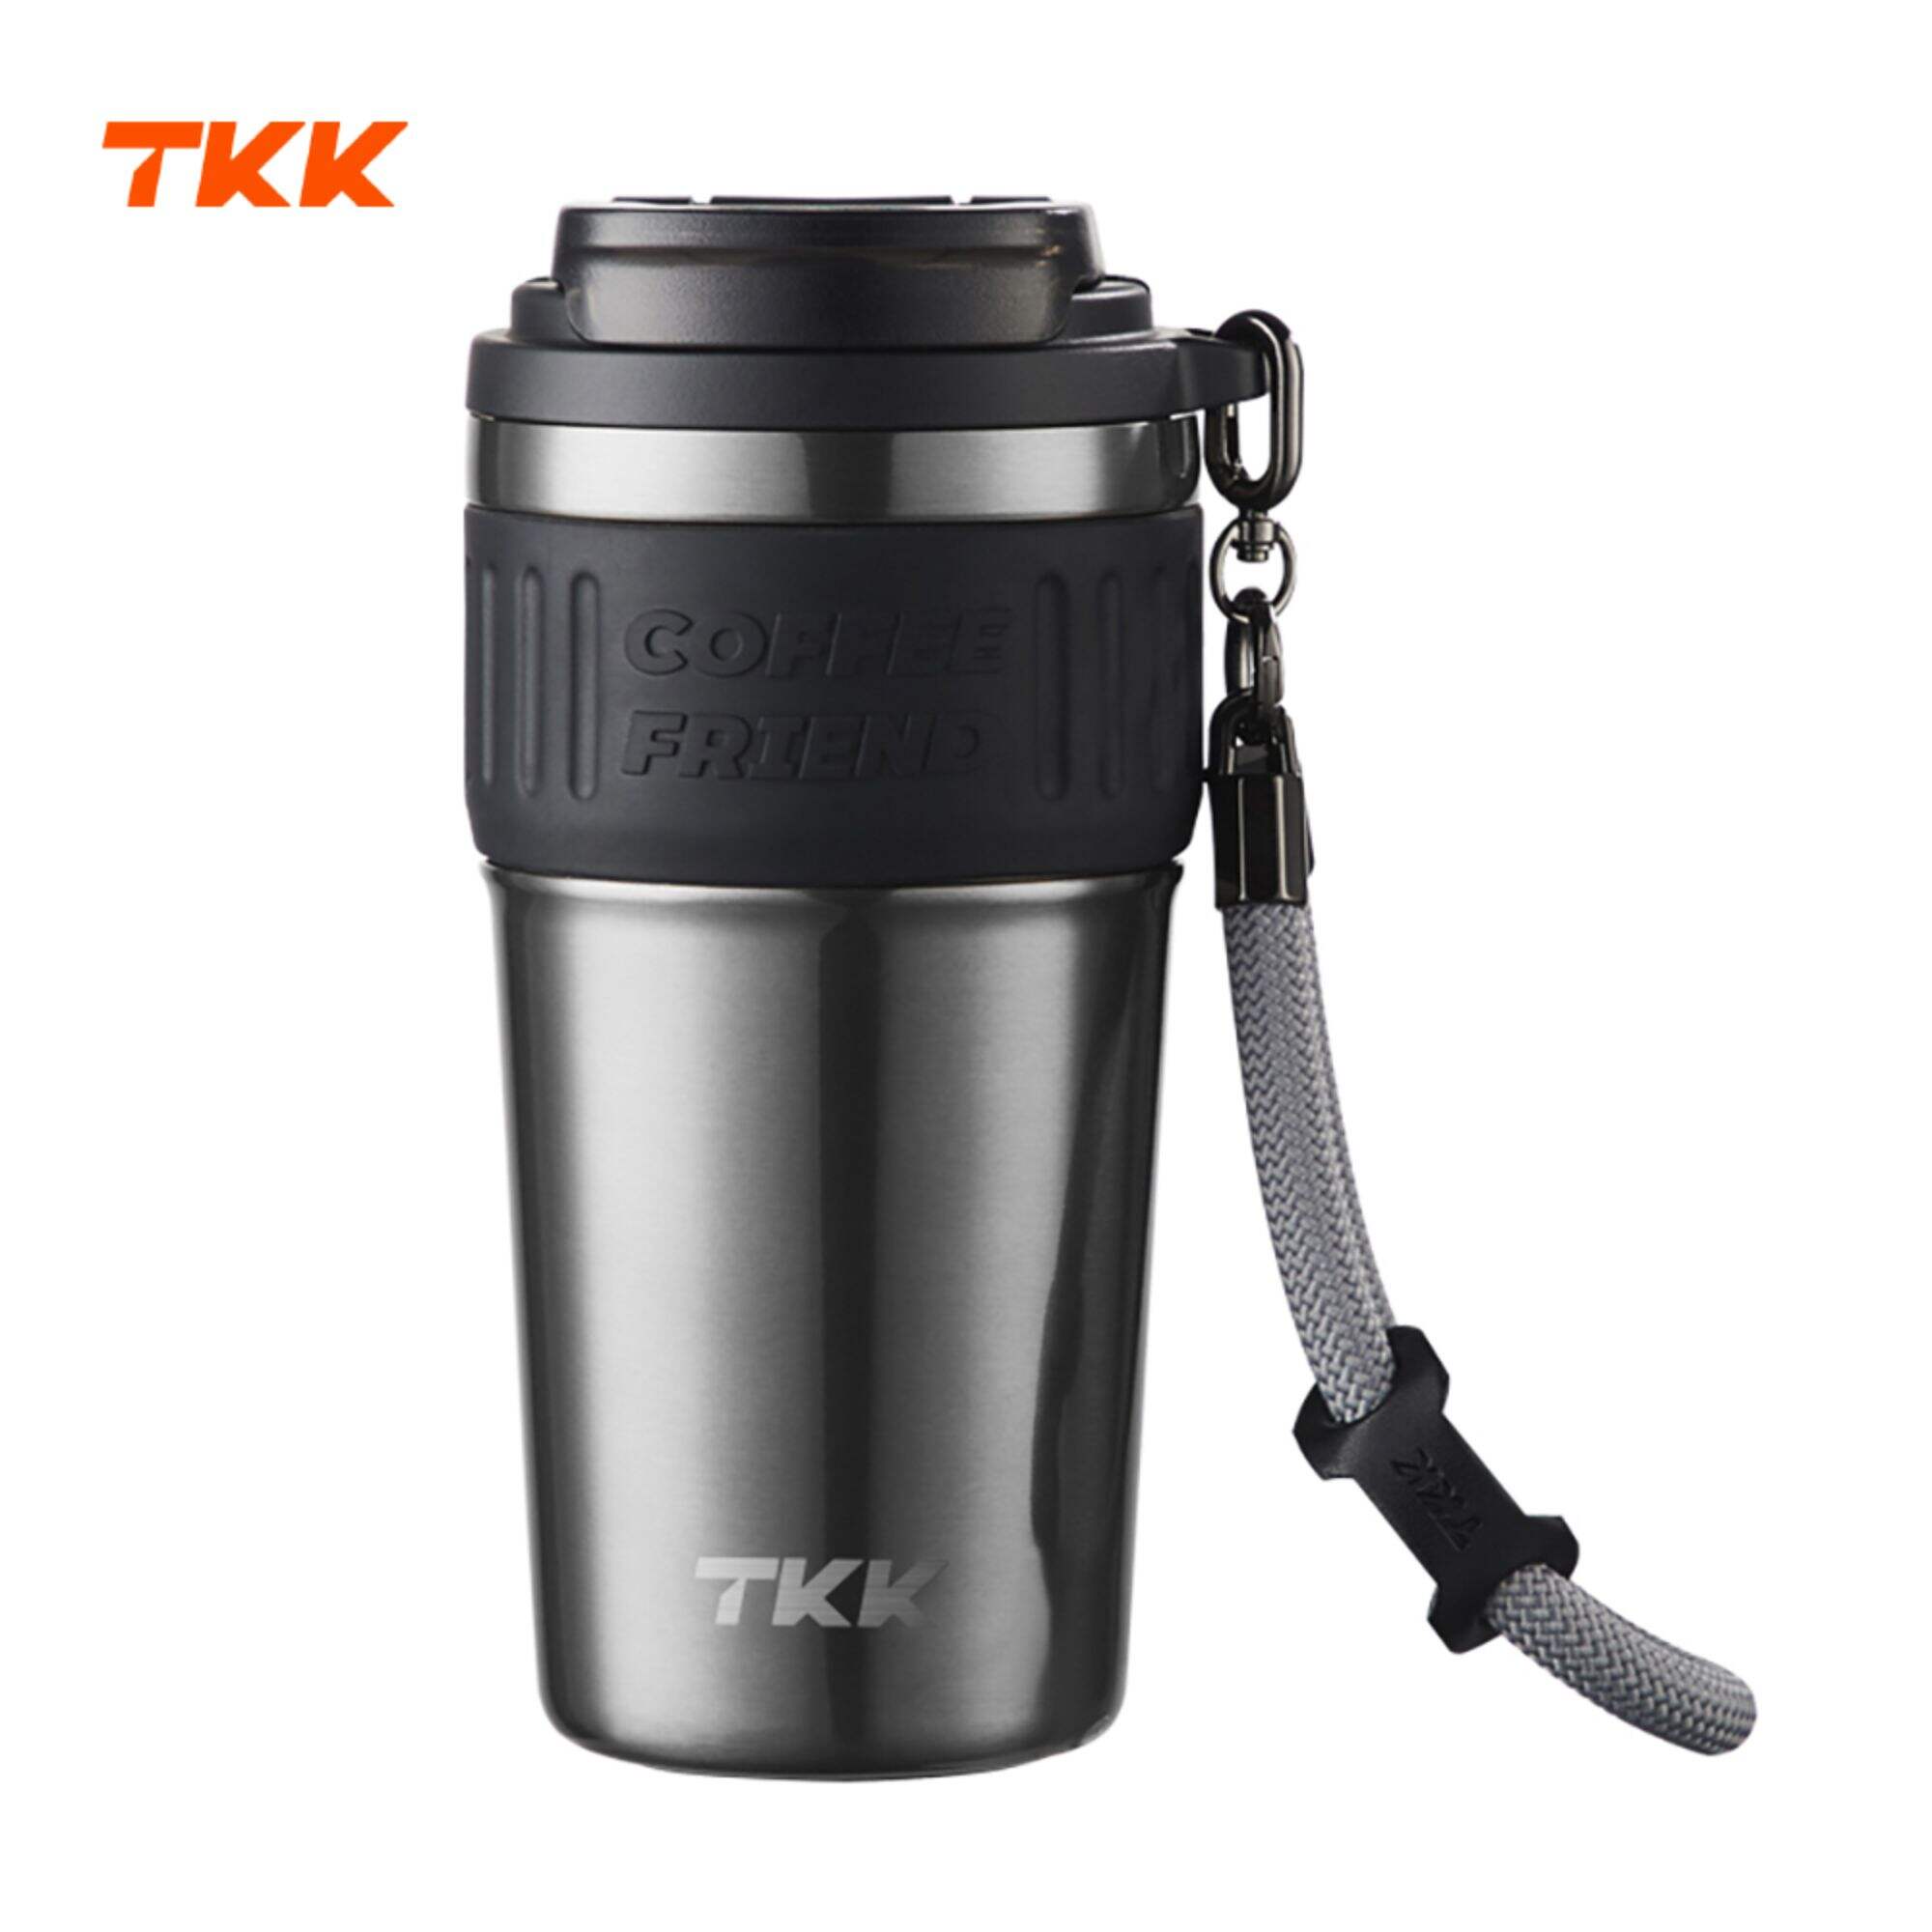 Insulated Coffee Thermos with Ceramic Coating, 21oz Iced Coffee Tumbler Cup with Straw Lid Double Wall Vacuum Leak Proof Travel Mug with Strap for Hot and Iced Beverage